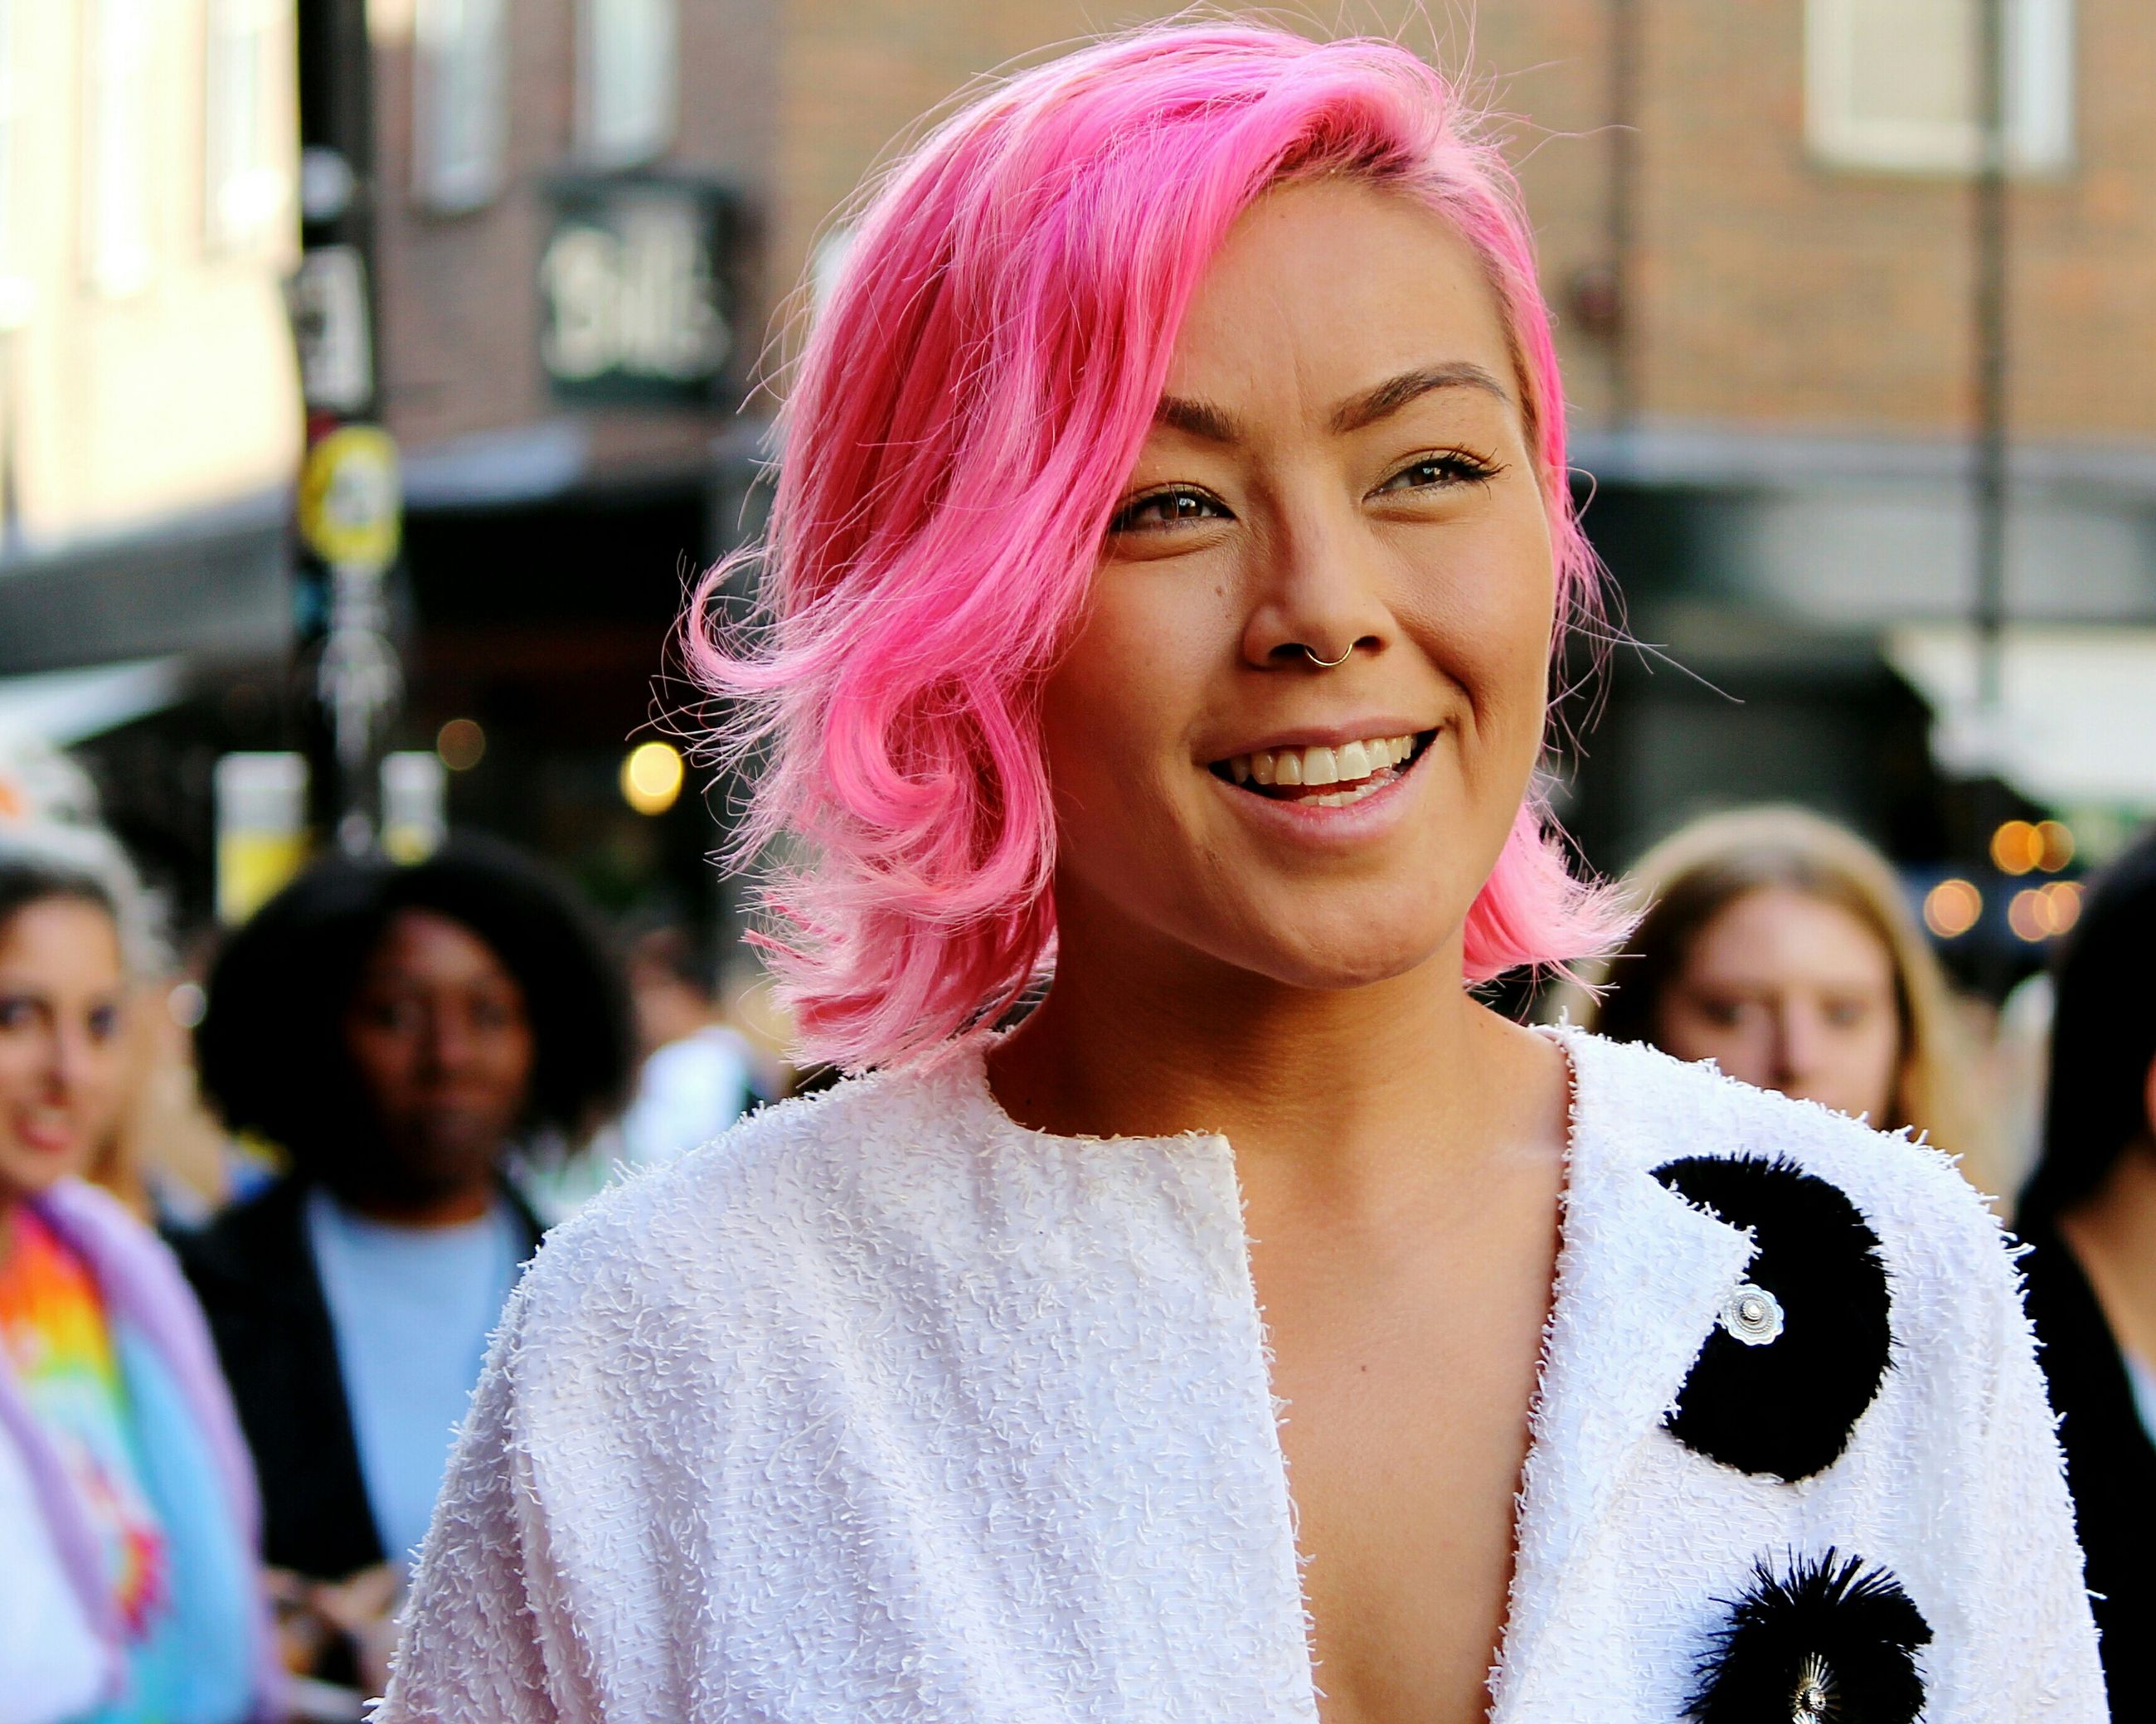 PORTRAIT OF HAPPY YOUNG WOMAN WITH PINK HAIR